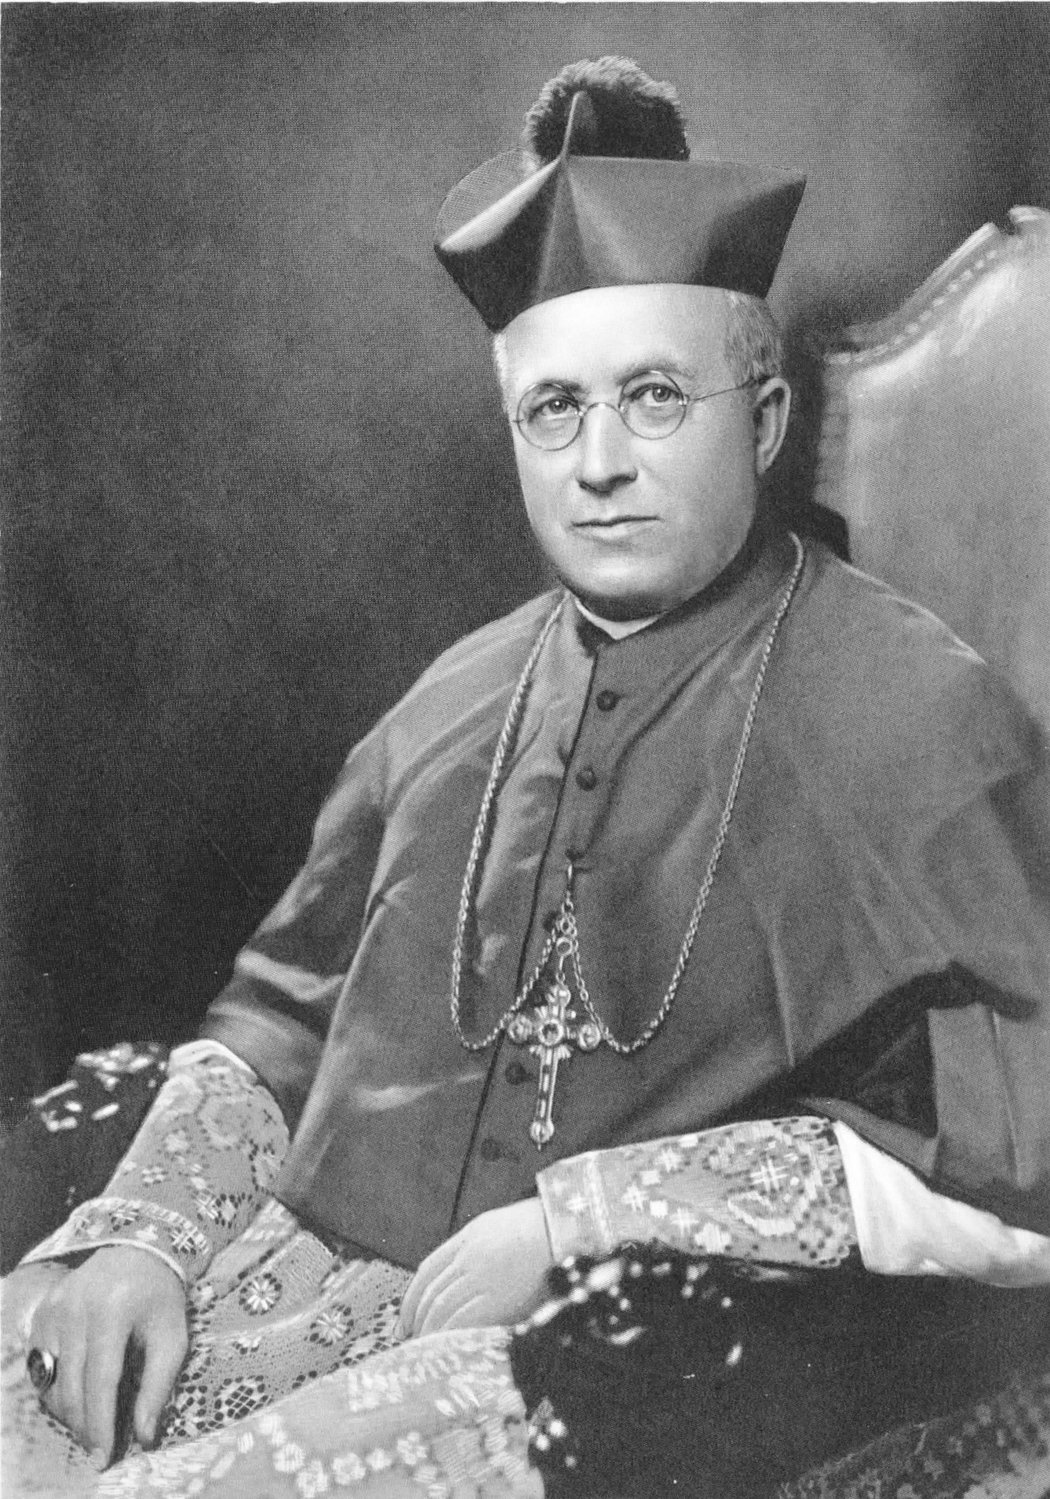 Bishop William A. Hickey was appointed Coadjutor Bishop of Providence, Rhode Island and Titular Bishop of Claudiopolis in Isauria by Pope Benedict XV on 
January 16, 1919.